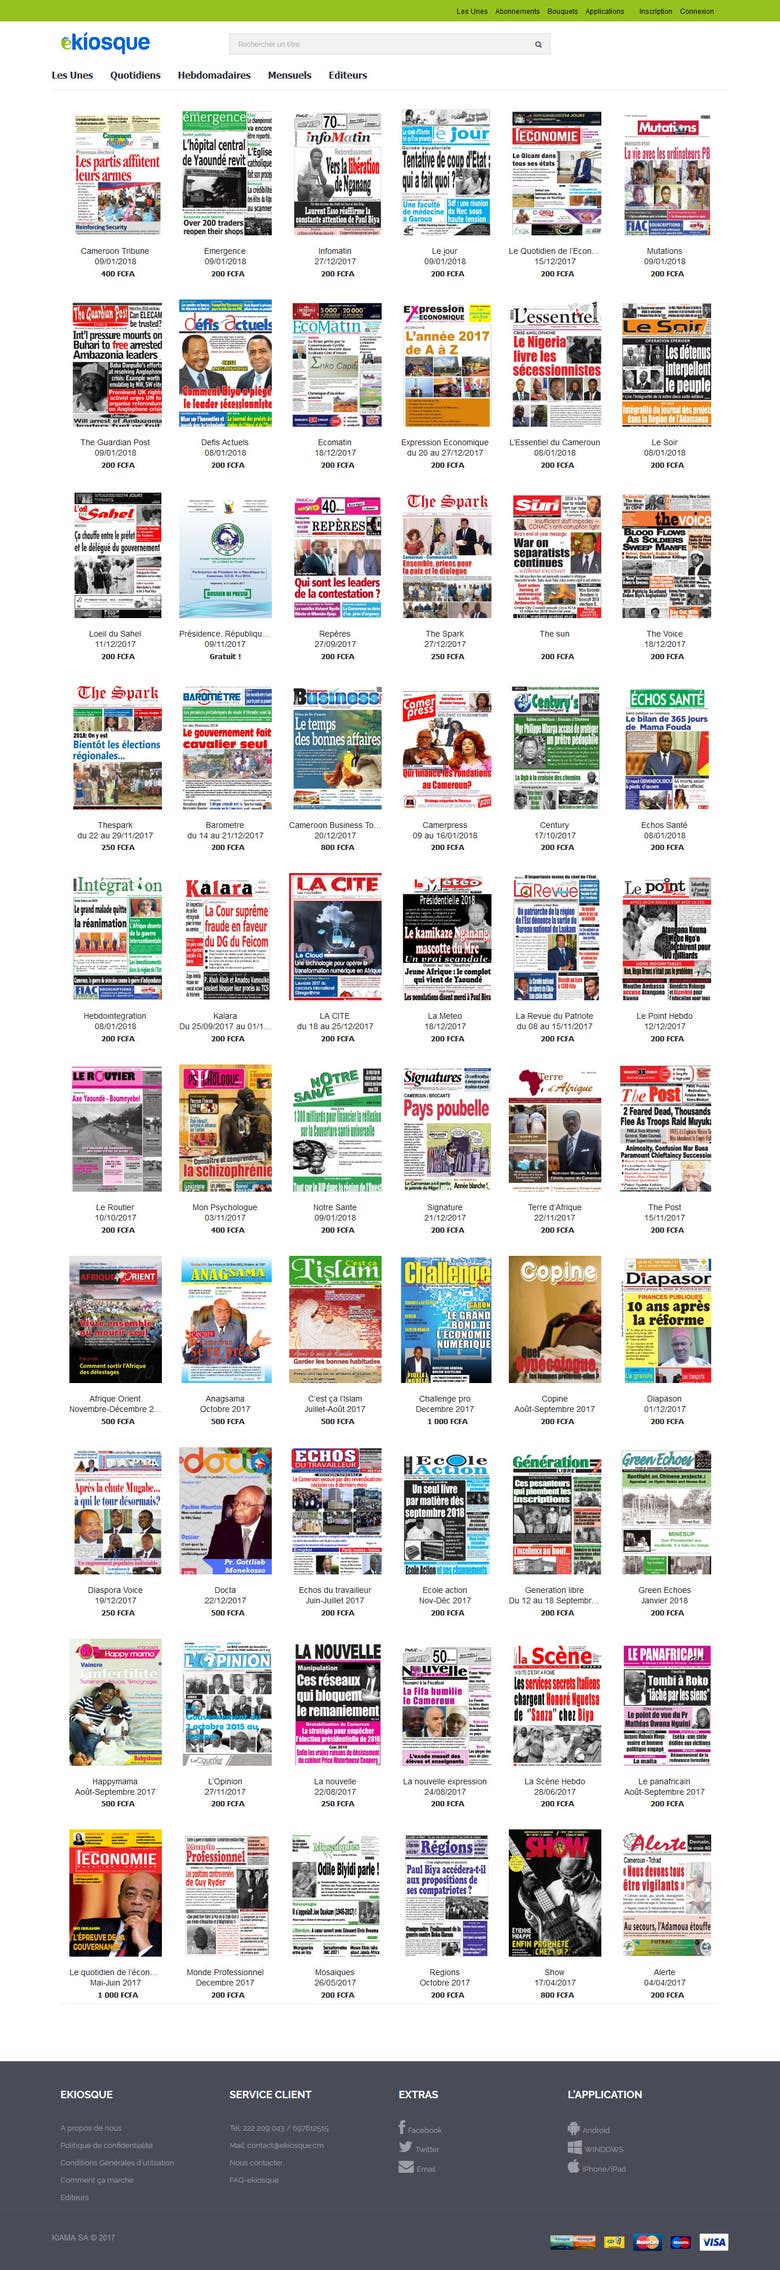 An ecommerce website for selling newspaper